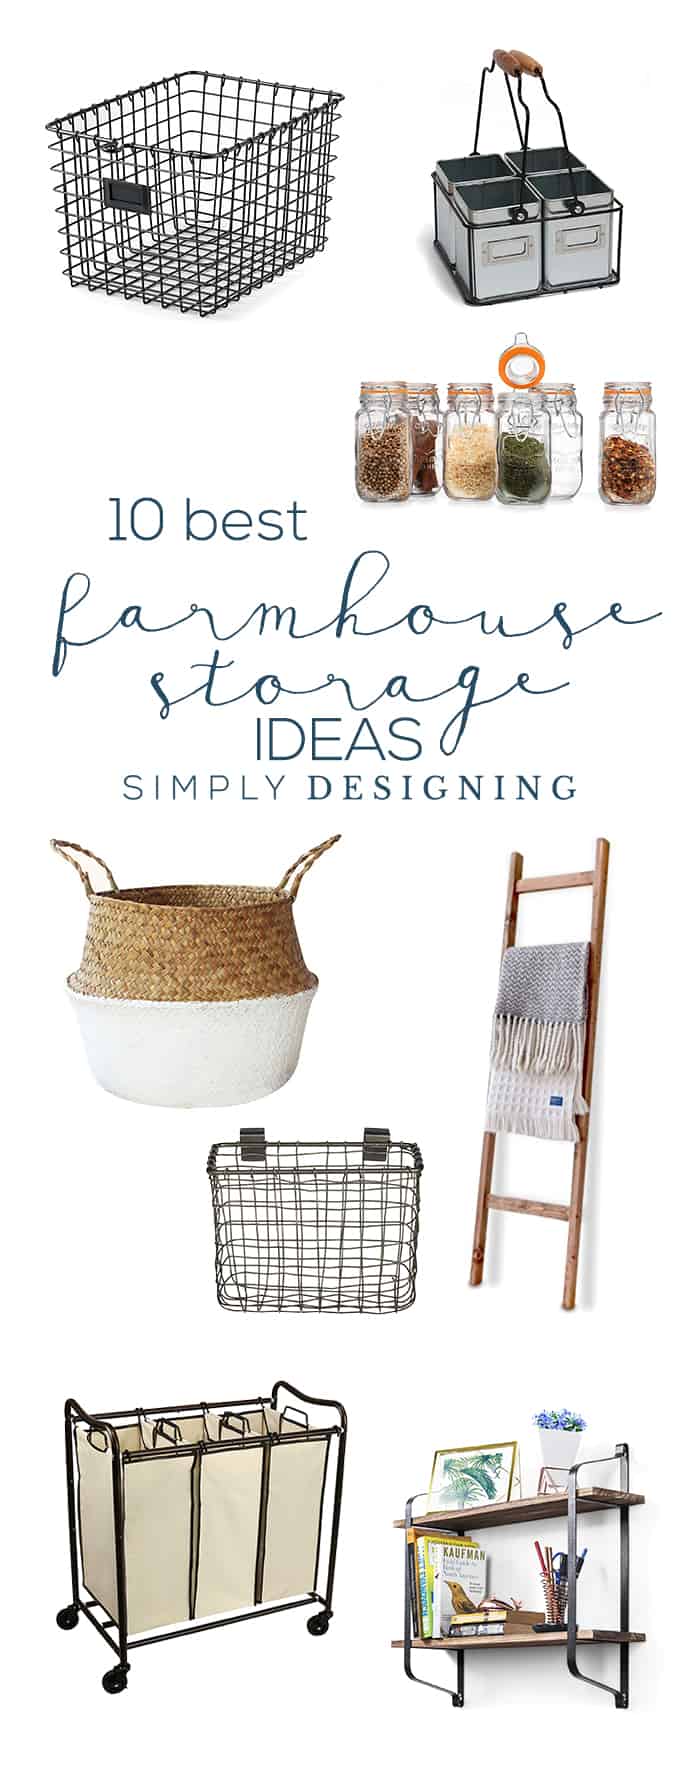 The 10 Best Farmhouse Storage Ideas - beautiful farmhouse storage ideas that are easy to integrate into your home today and totally affordable